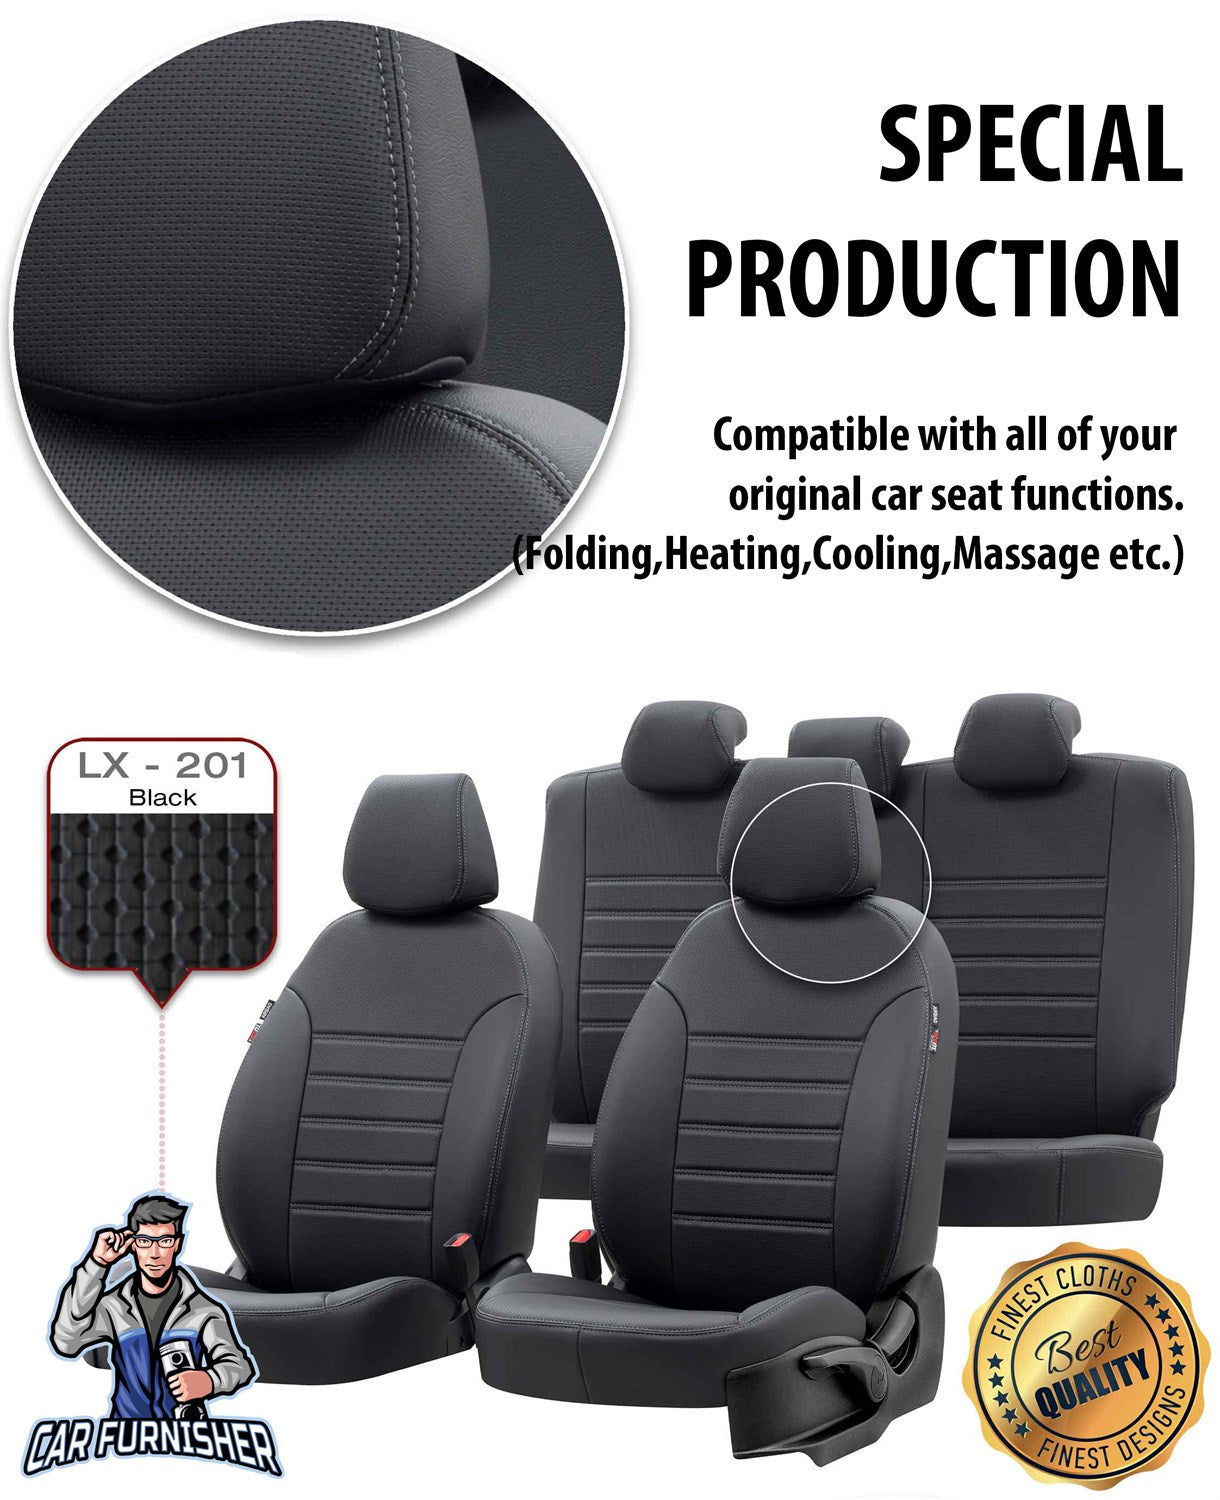 Seat Leon Seat Covers New York Leather Design Black Leather